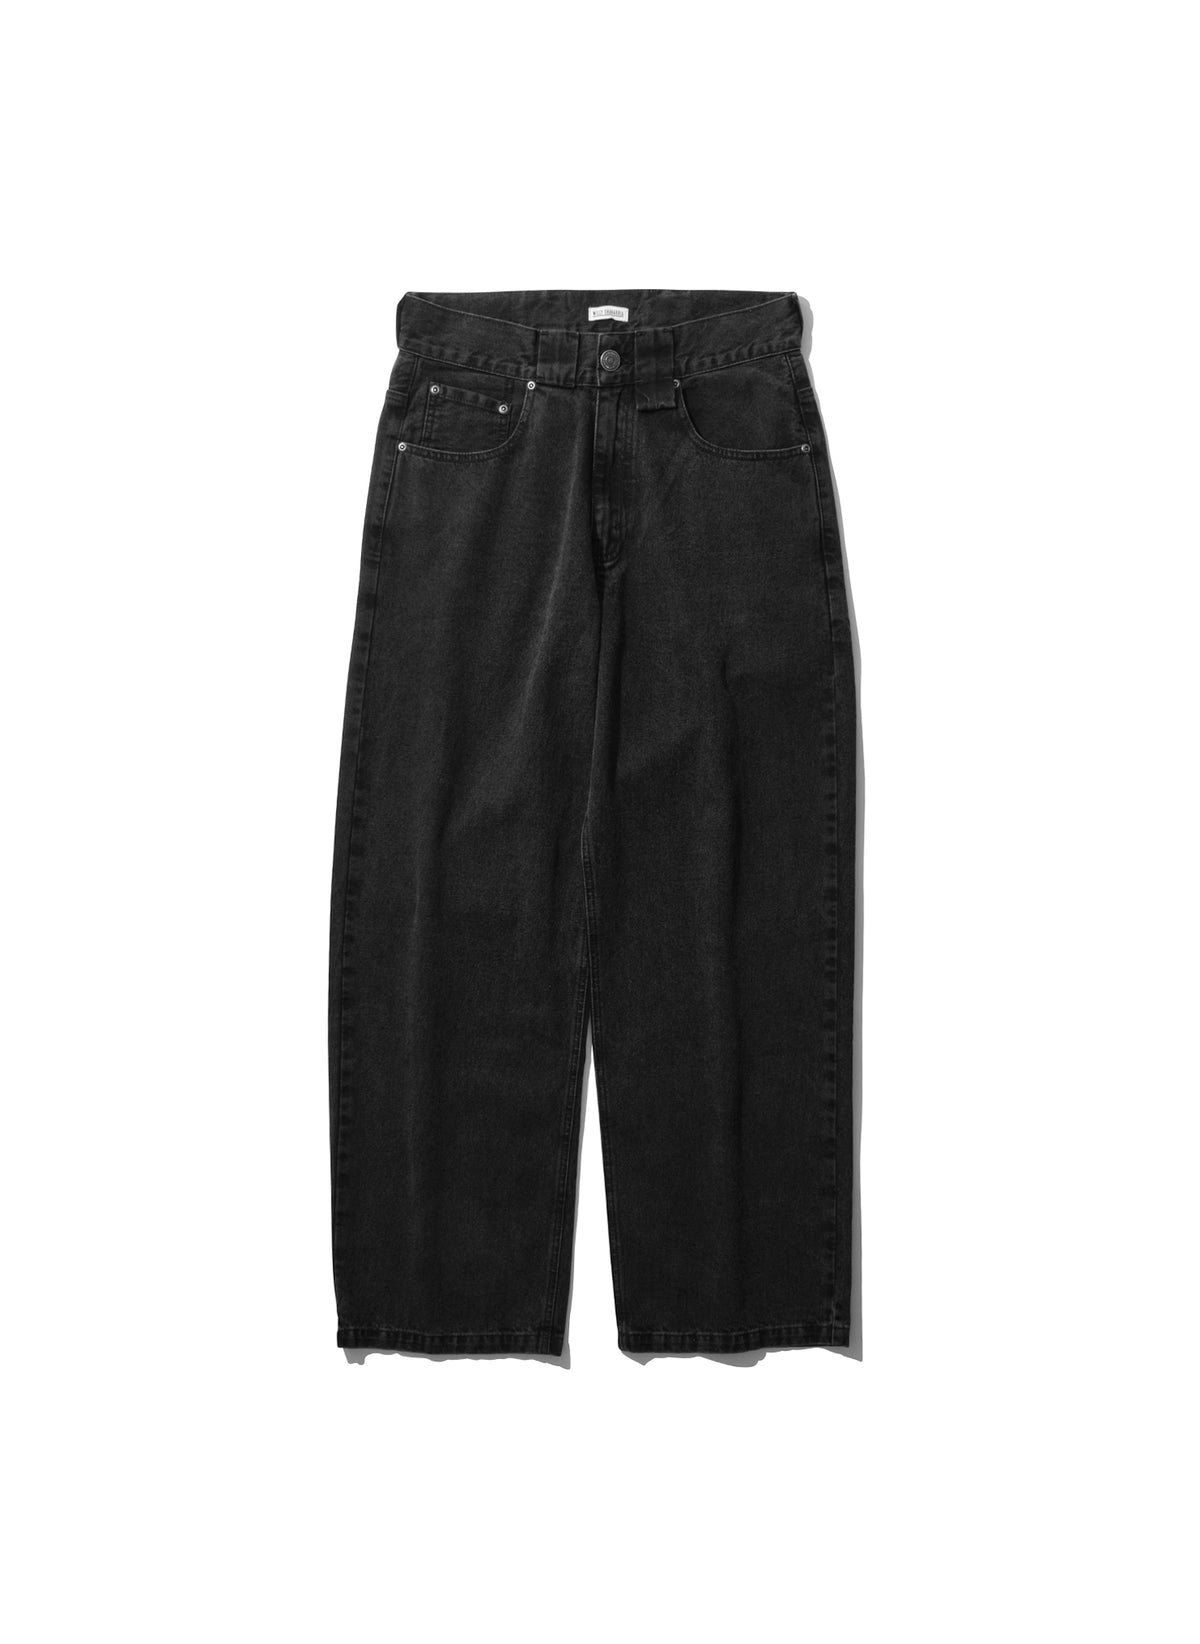 WILLY CHAVARRIA / STRAIGHT DENIM PANTS WASHED BLACK